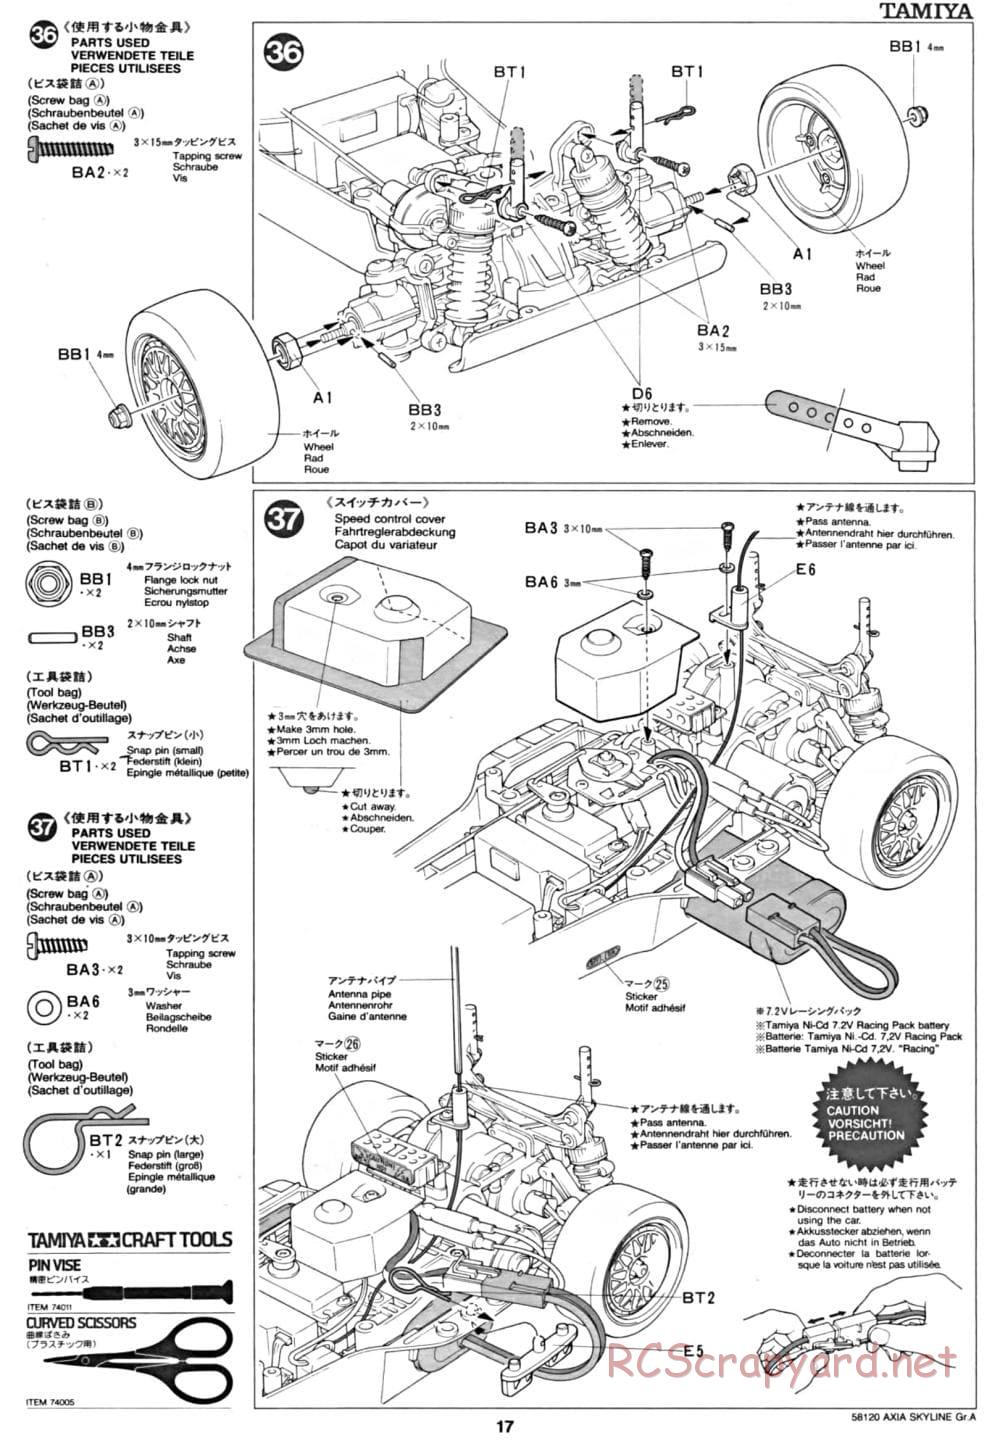 Tamiya - Axia Skyline GT-R Gr.A - TA-01 Chassis - Manual - Page 17